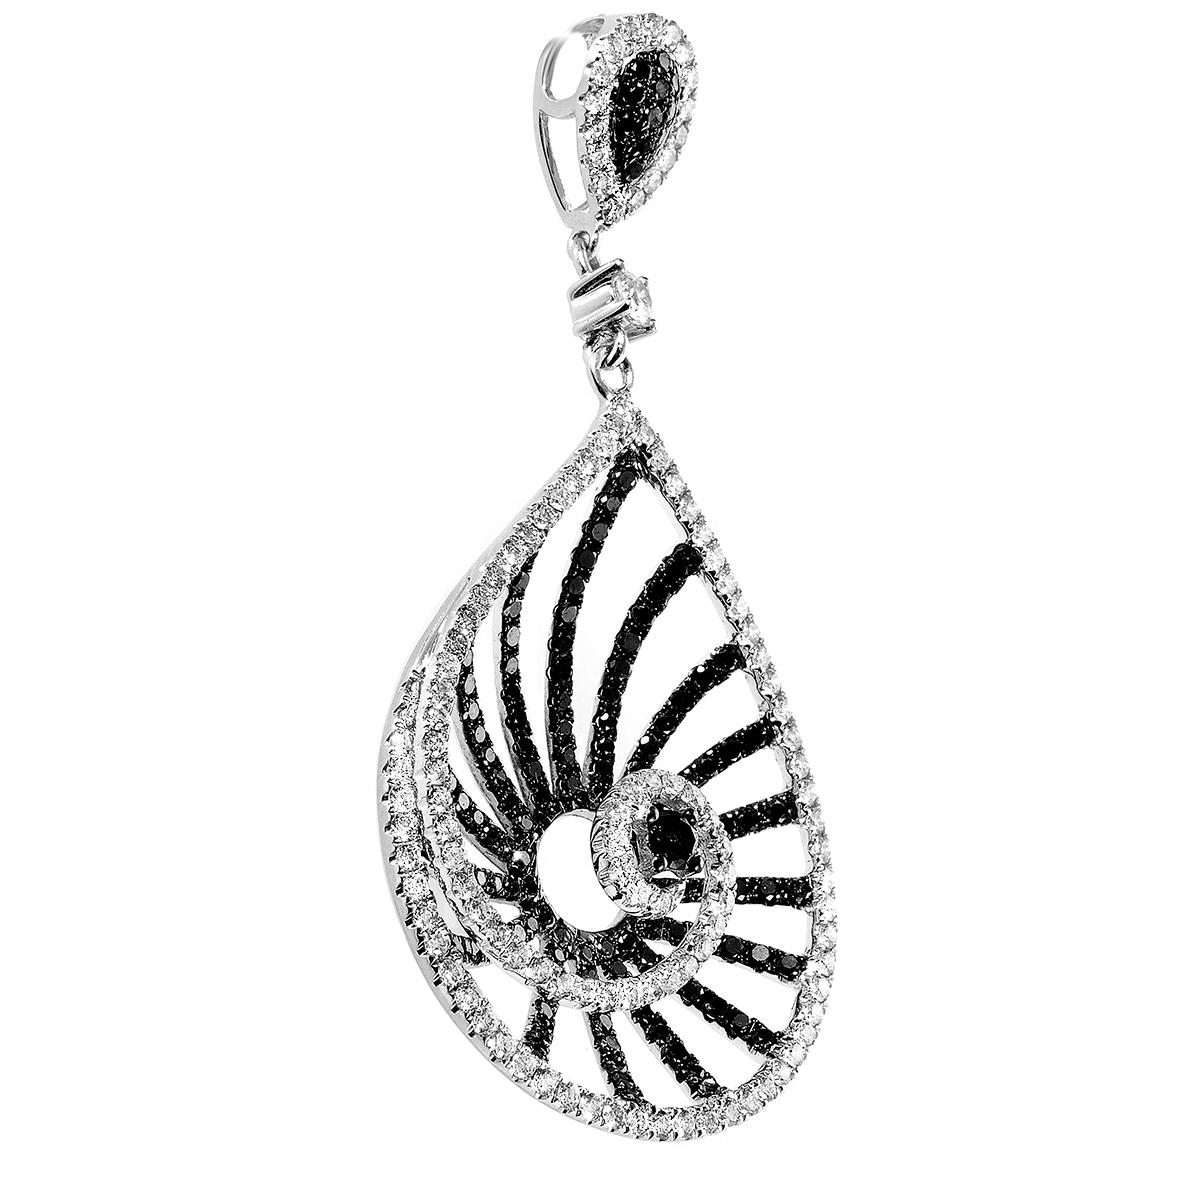 This chainless pendant from Natalie K has a rare and exotic beauty that is absolutely stunning! The pendant is made of 14K white gold and is set with ~3.28ct of black and white diamonds.